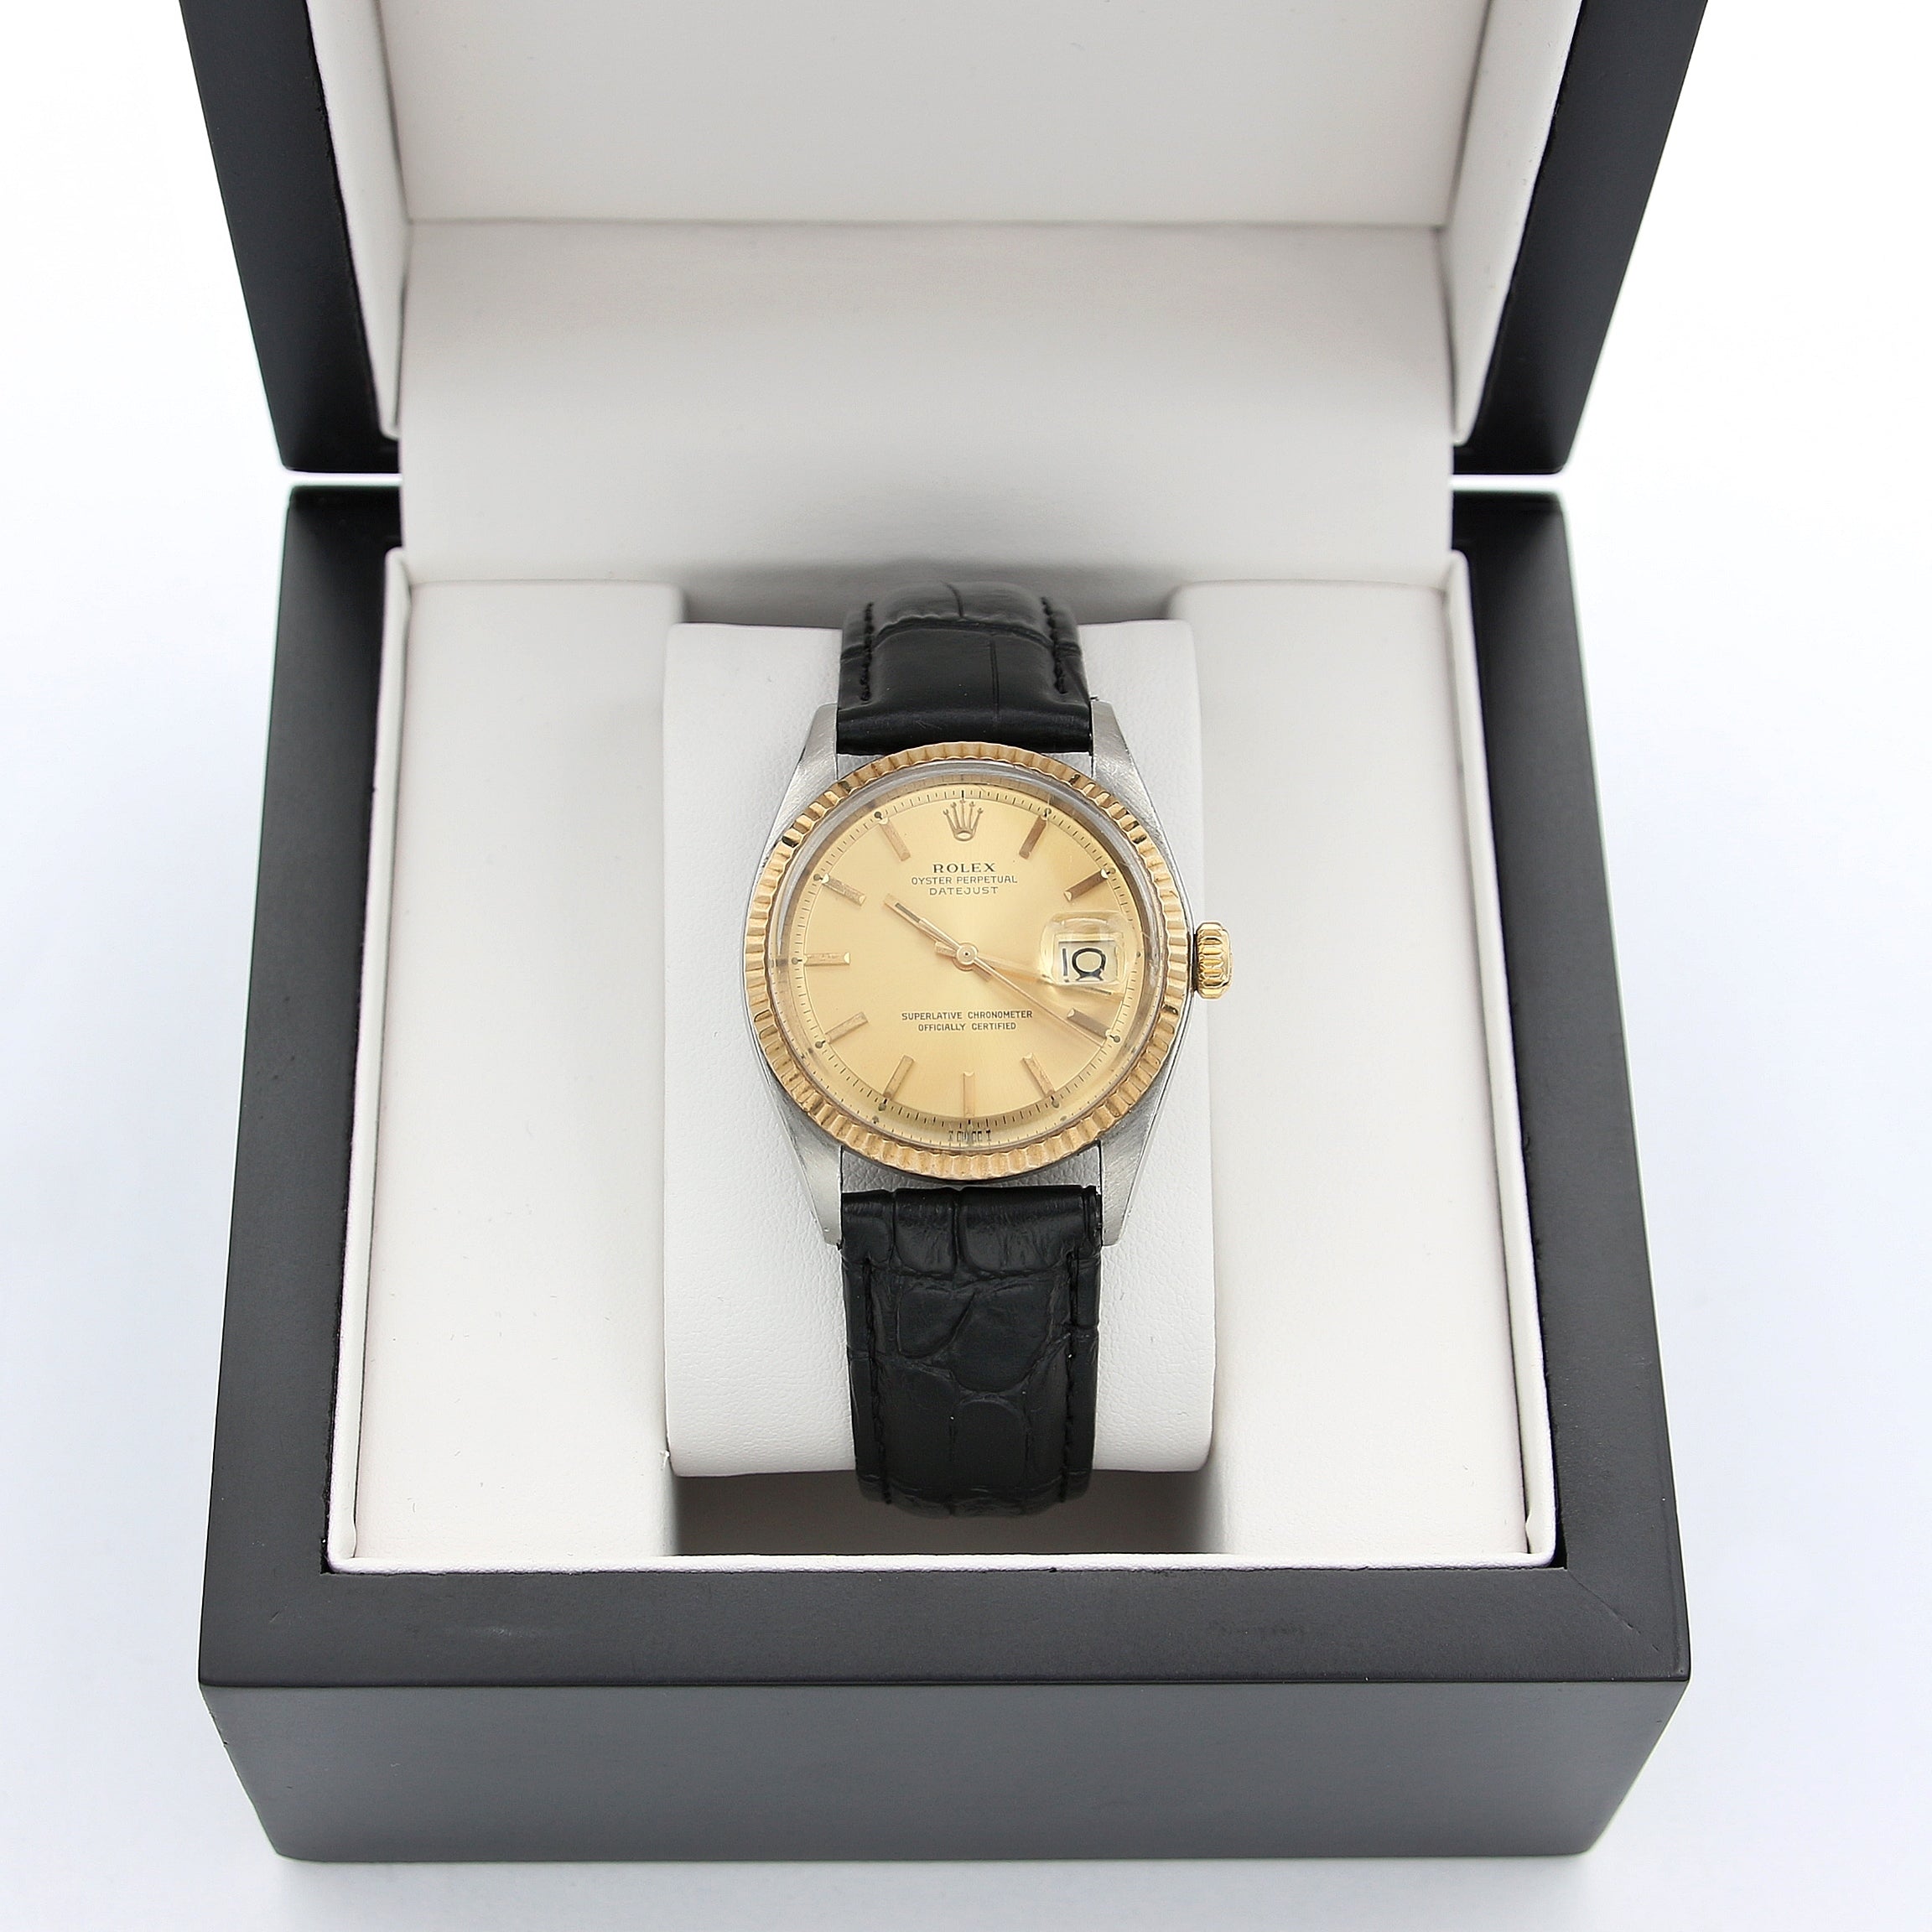 Rolex Datejust ref. 1601 - Steel/Yellow Gold - Champagne Dial  - Leather strap